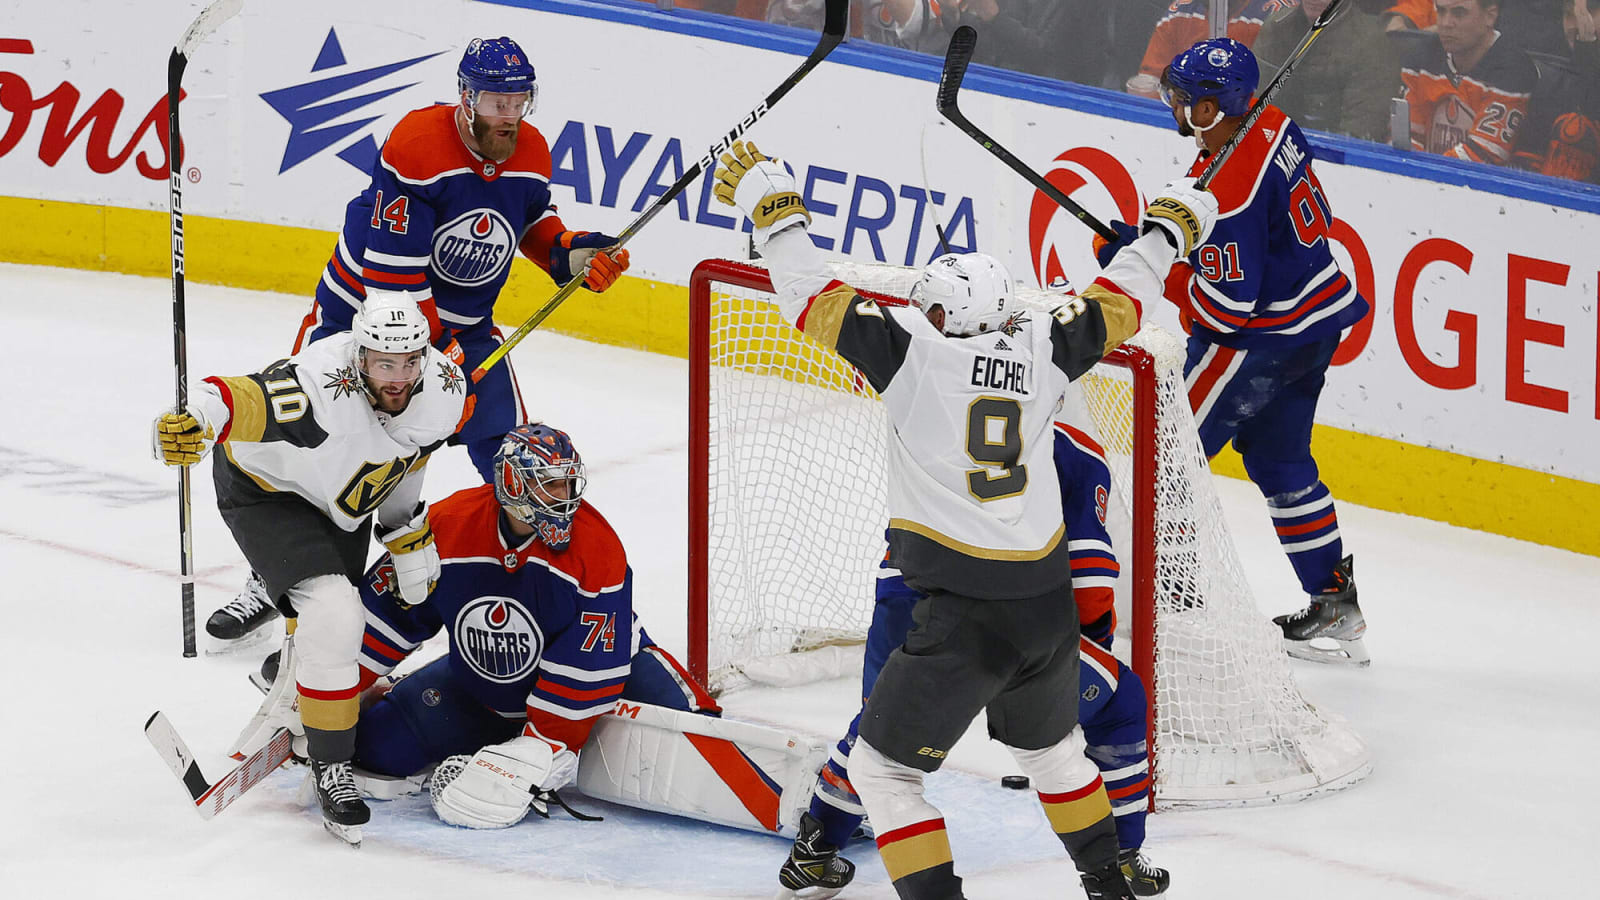 The Day After 73.0: Edmonton Oilers let it slip away as they fall 4-3 to Vegas Golden Knights in OT